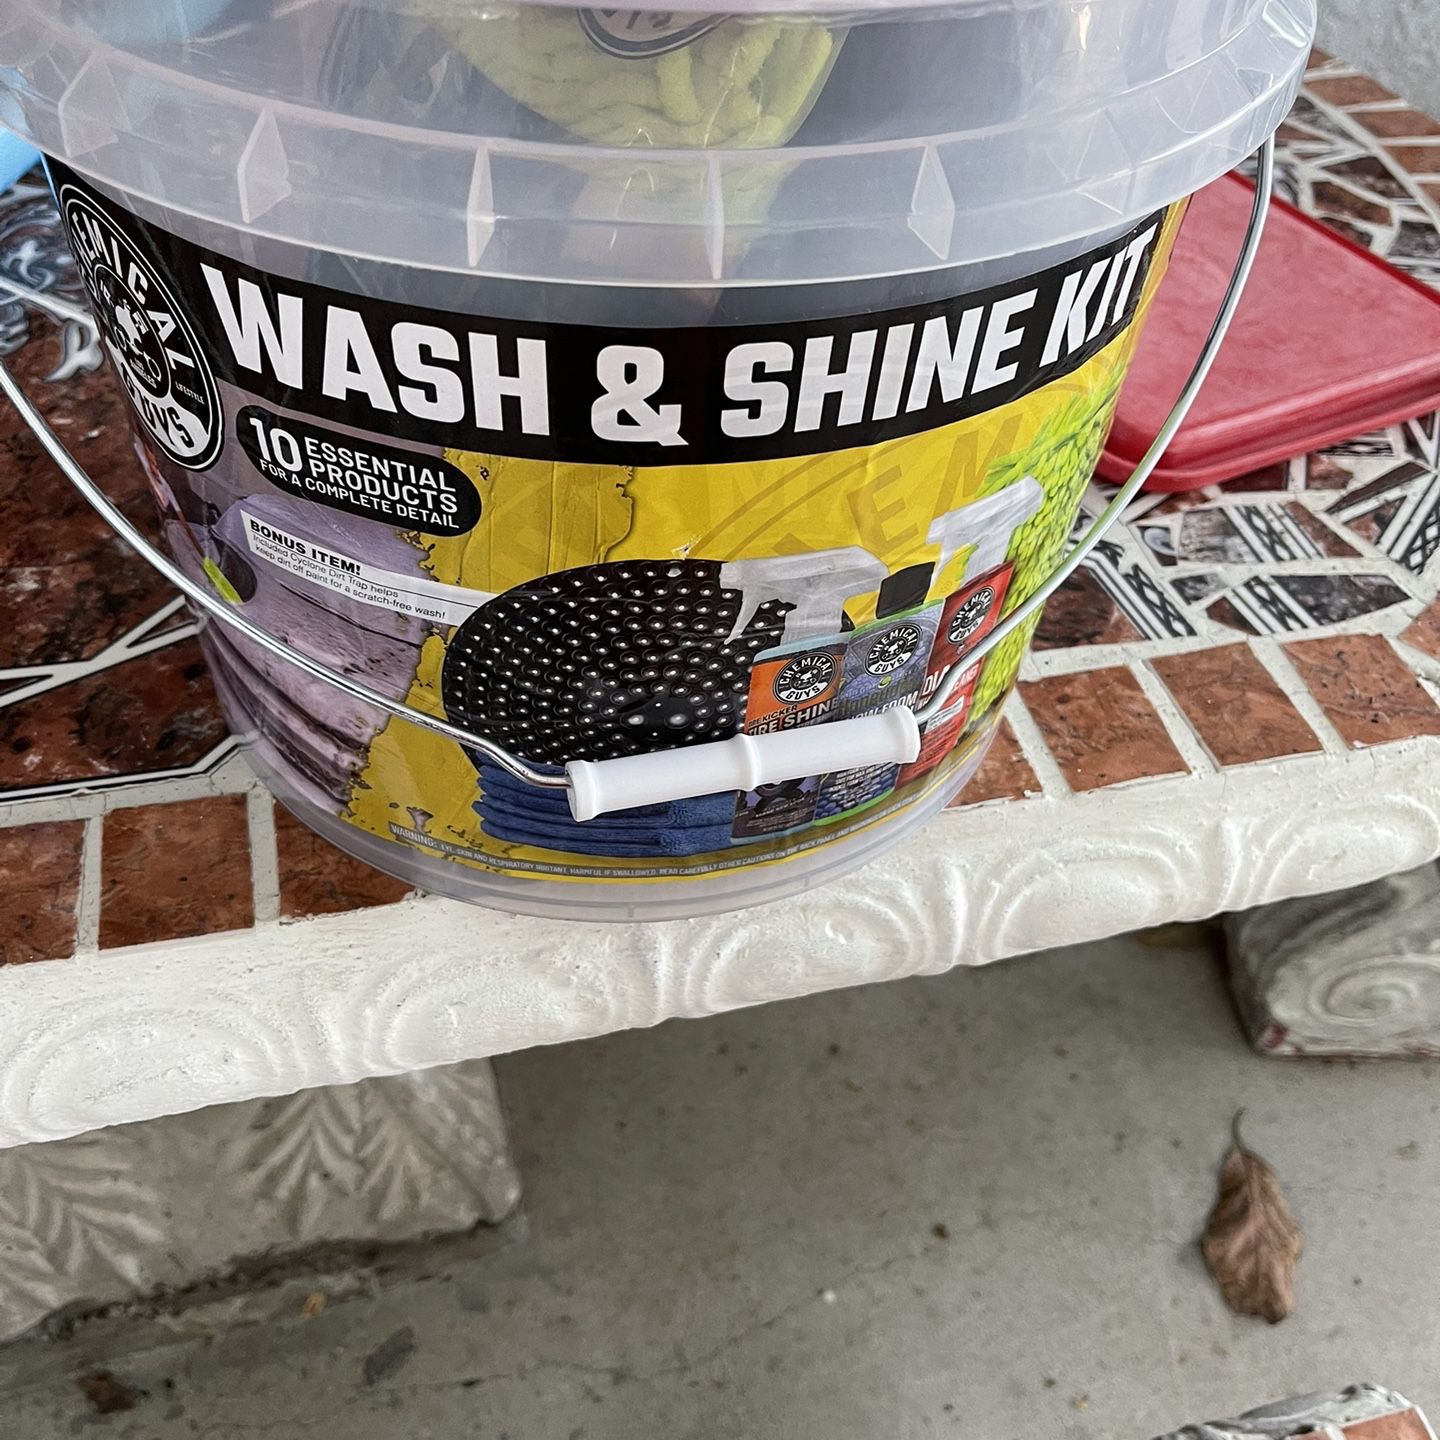 Chemical Guys Foaming Citrus Fabric Clean for Sale in South Gate, CA -  OfferUp